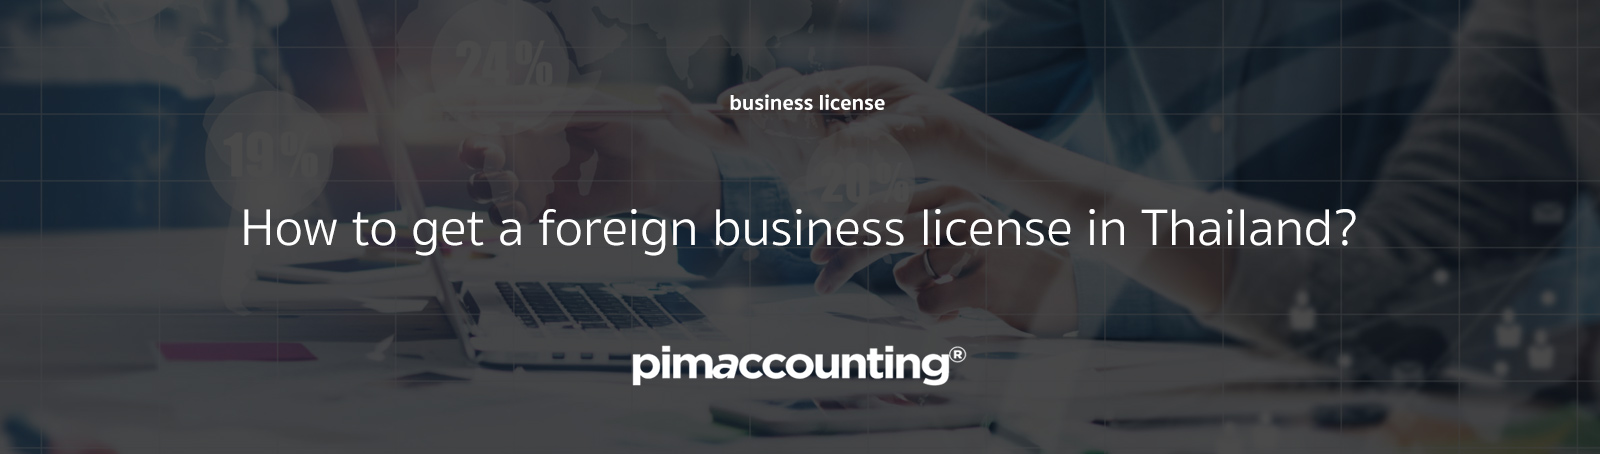 How to get a Foreign Business License in Thailand